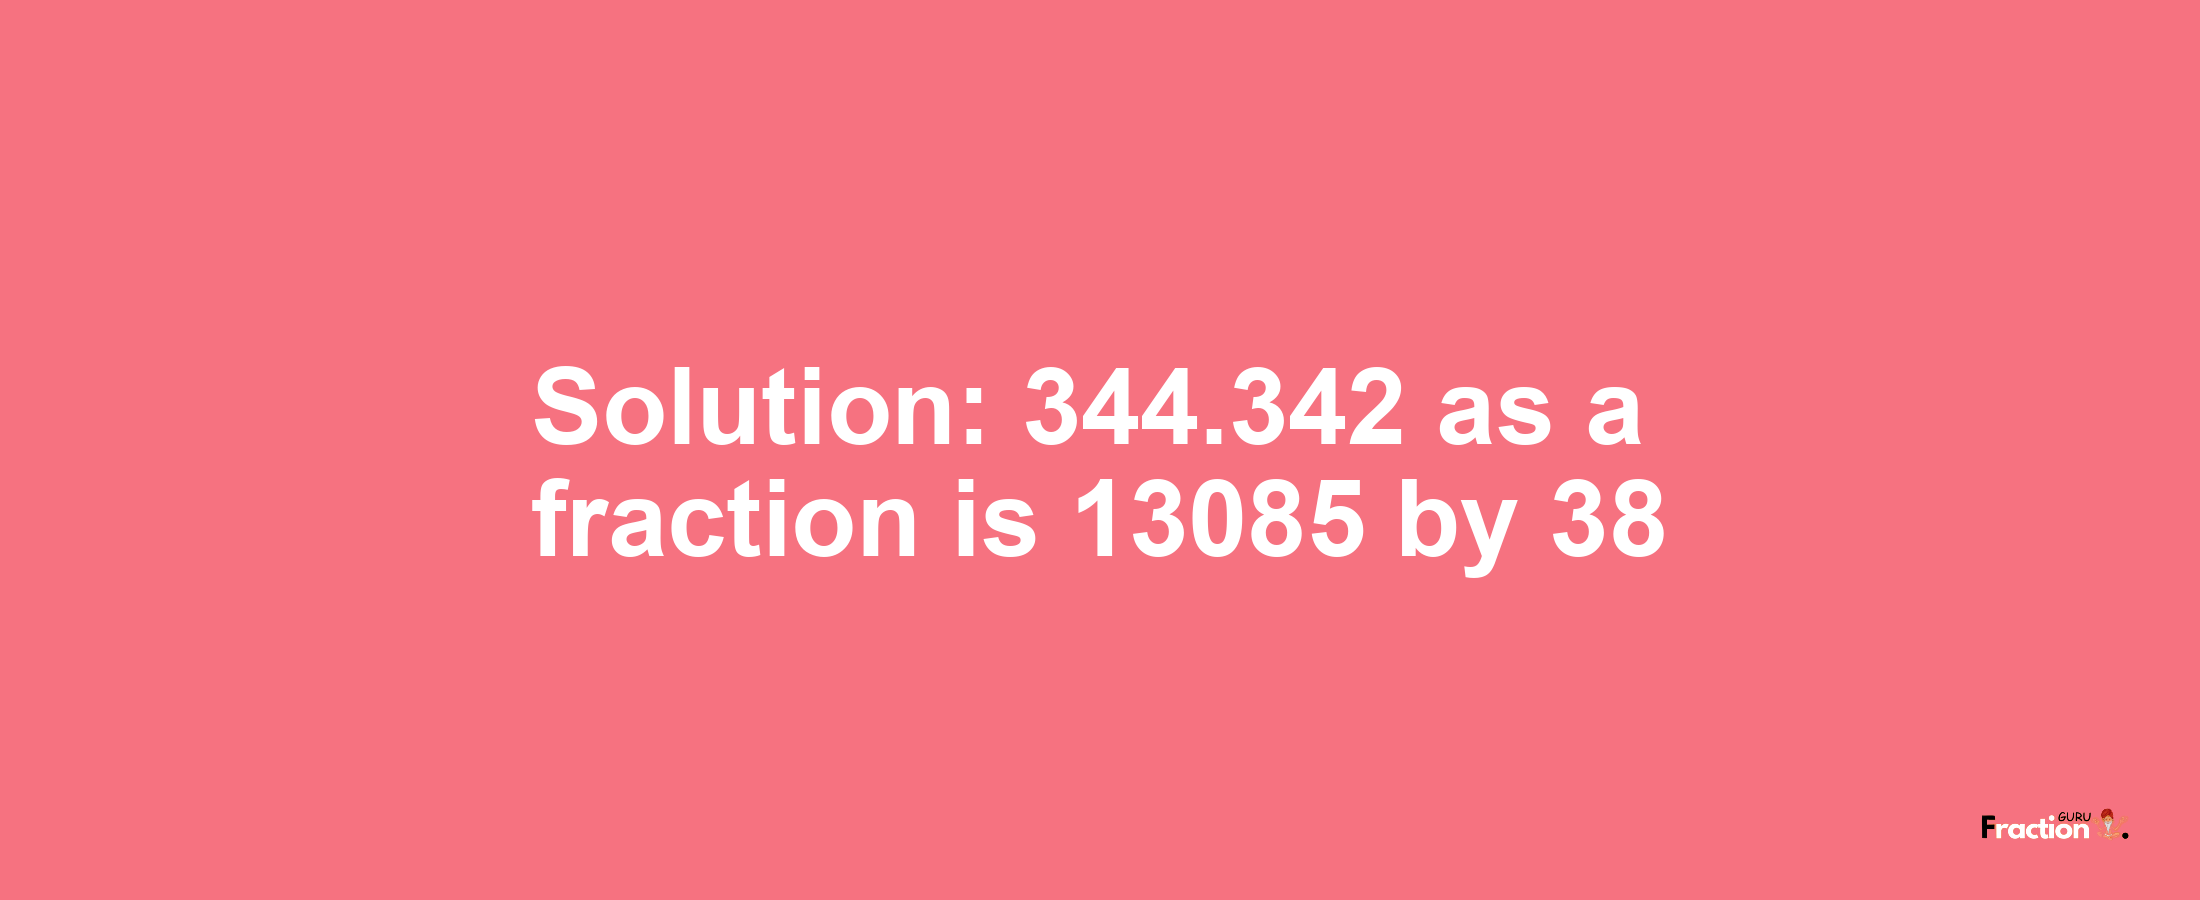 Solution:344.342 as a fraction is 13085/38